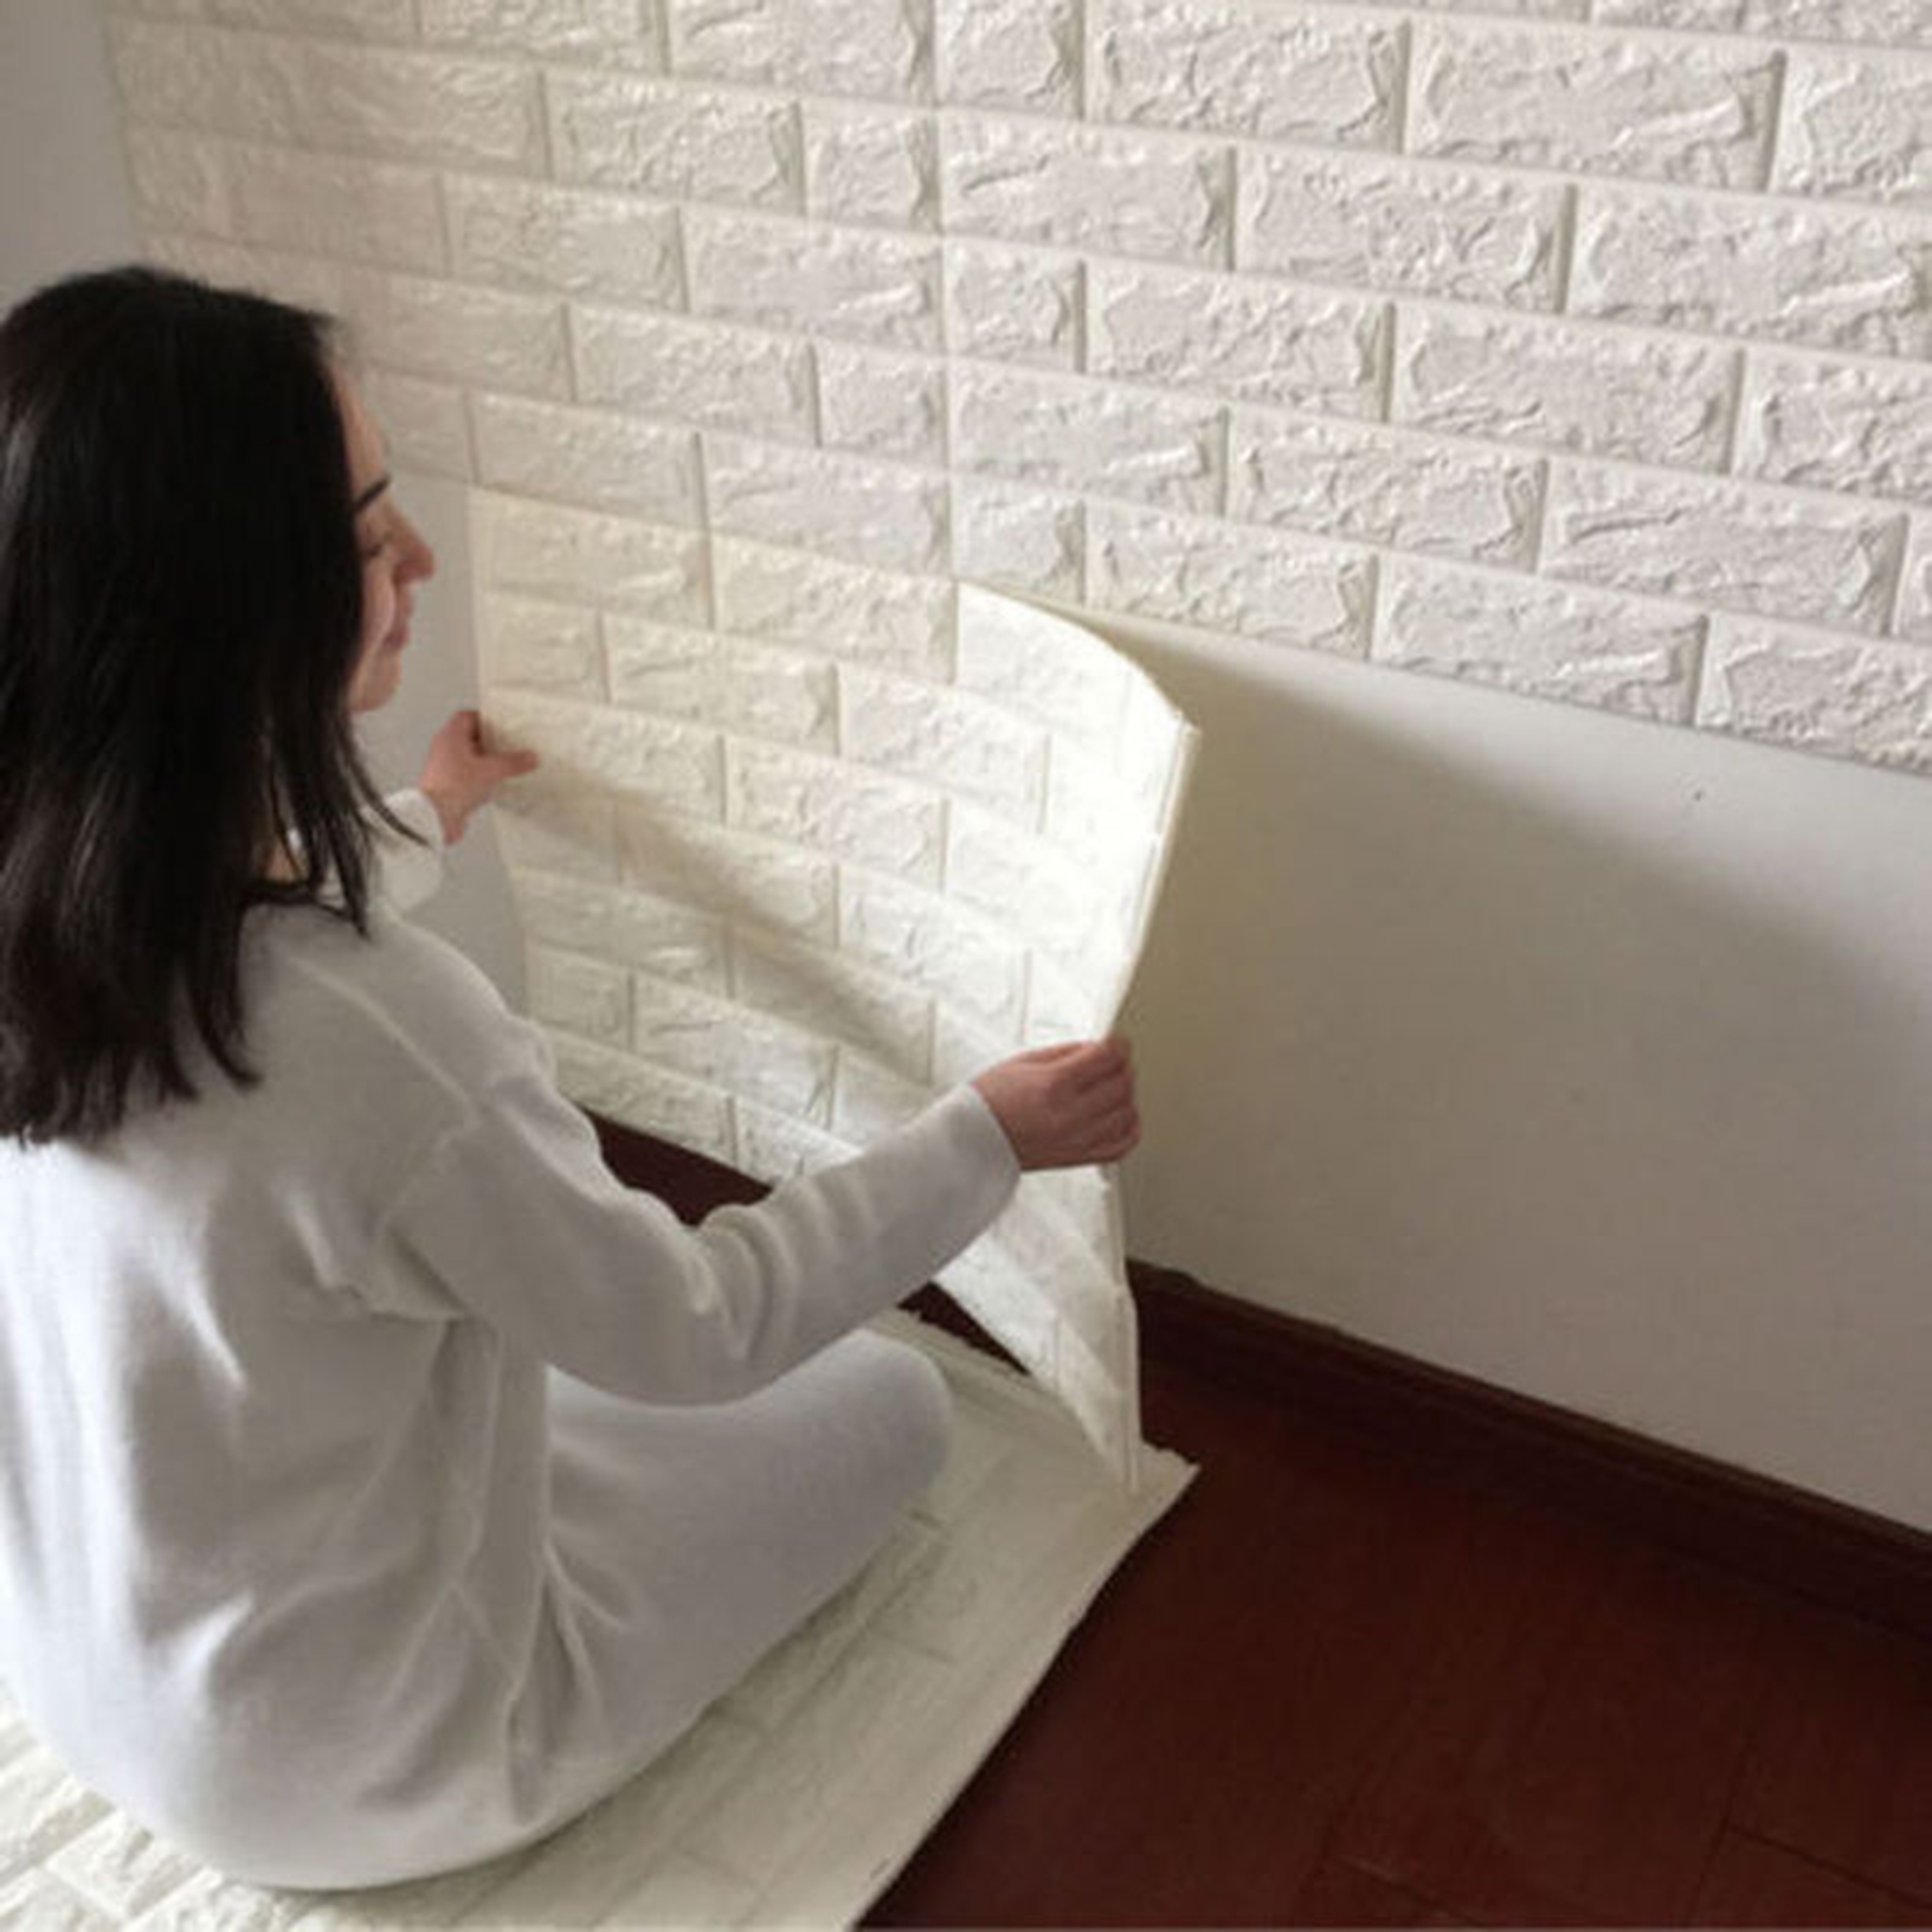 3D Brick Pattern Wall Wallpaper White Brick Self-Adhesive 3D Wall Panels Peel and Stick Wallpaper Bedroom Living Room Wall Sticker Decoration - image 2 of 7